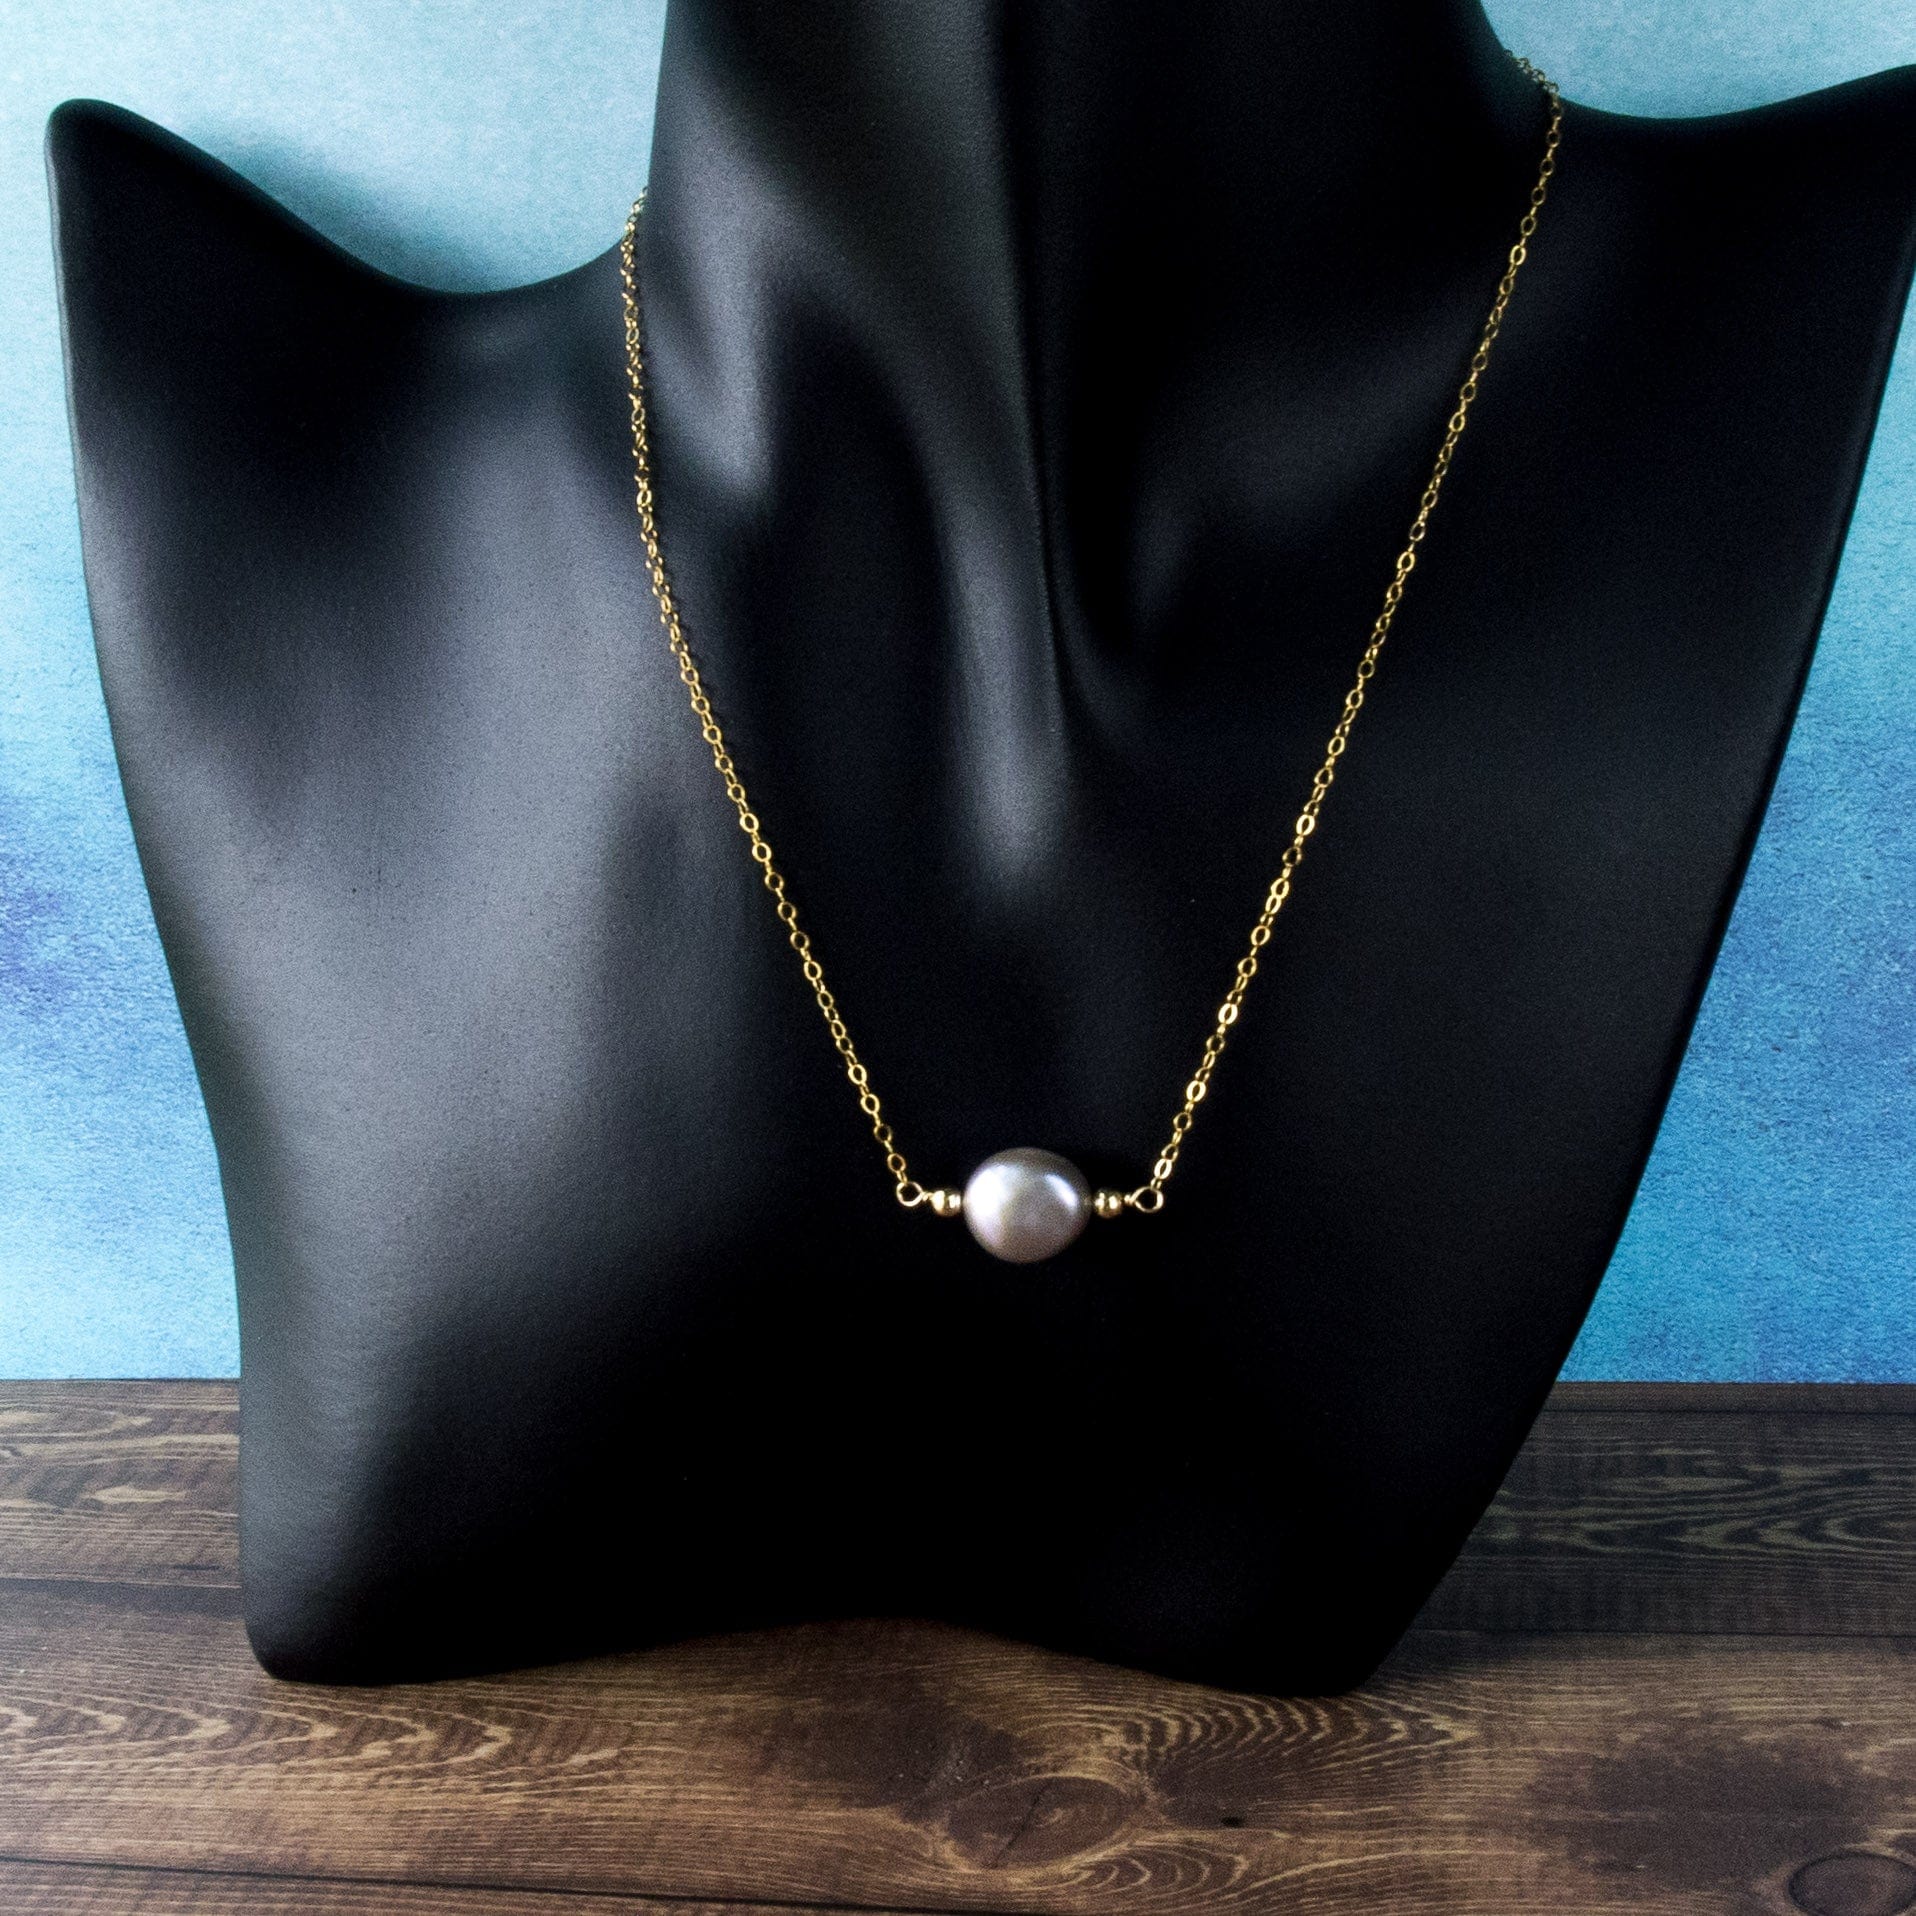 Arbor Trading Post Necklaces Handcrafted Freshwater Baroque Silver Pearl 14K Dainty Gold Necklace